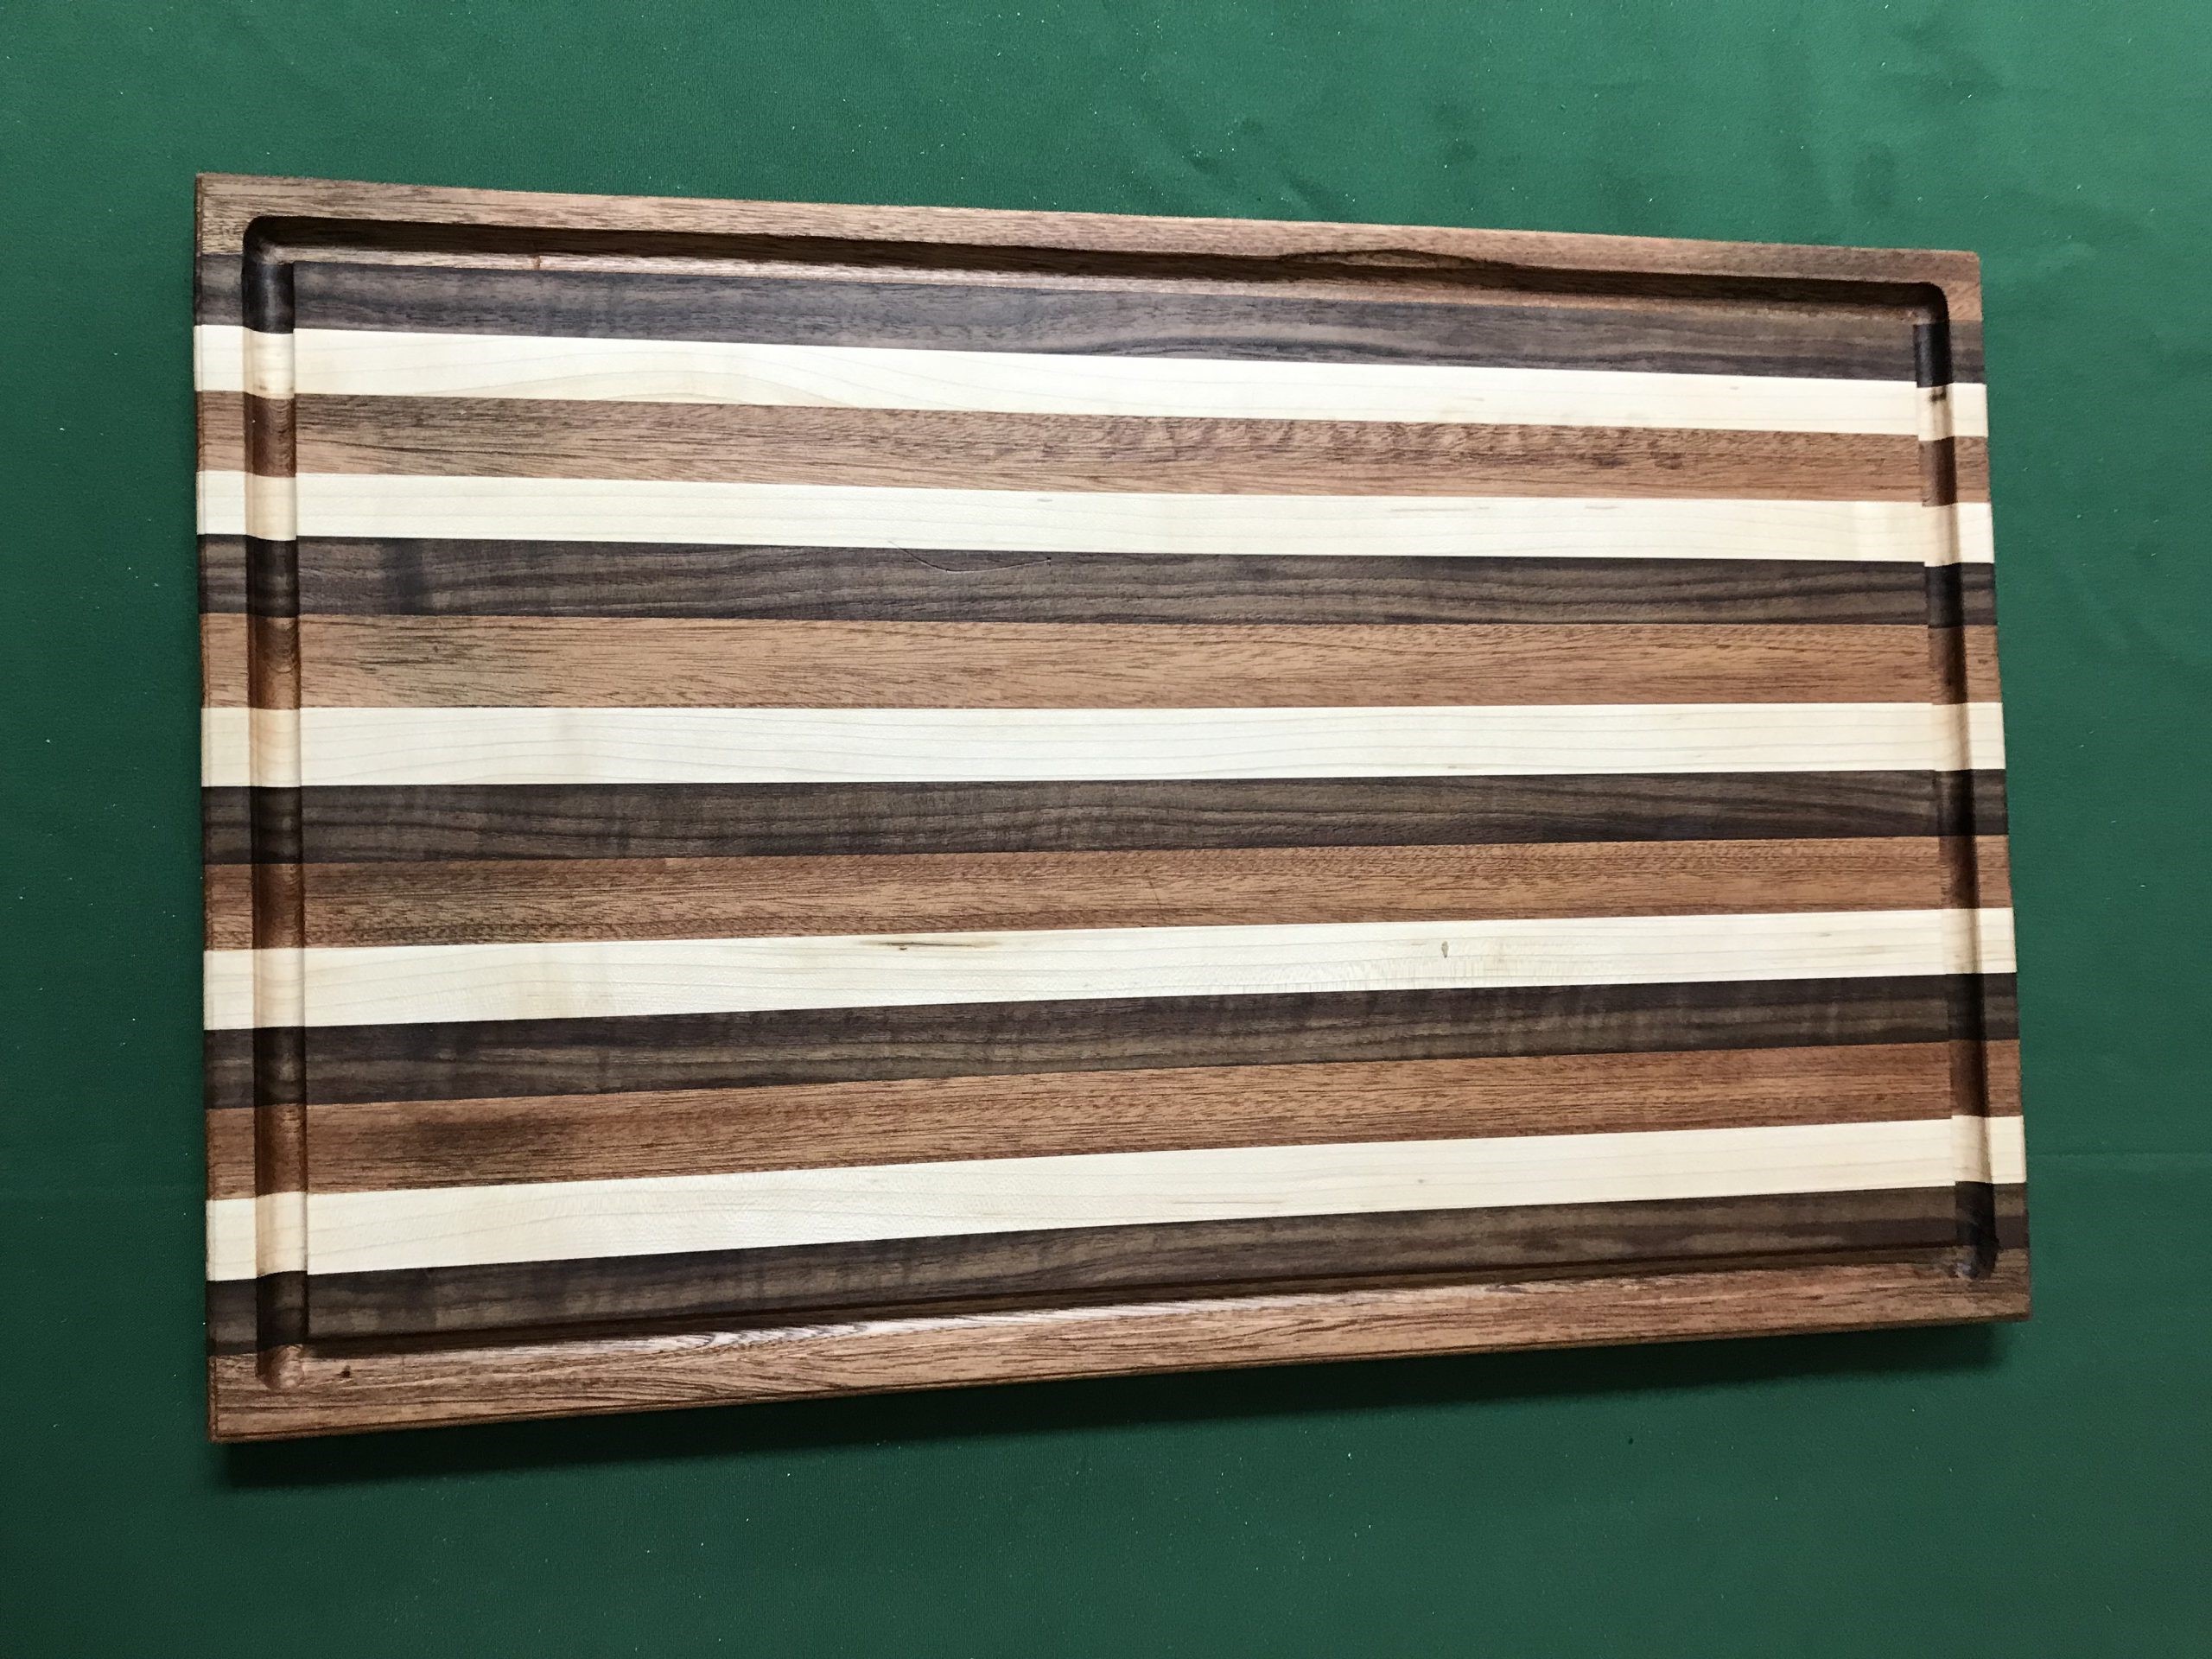 Making your Cutting Boards Last